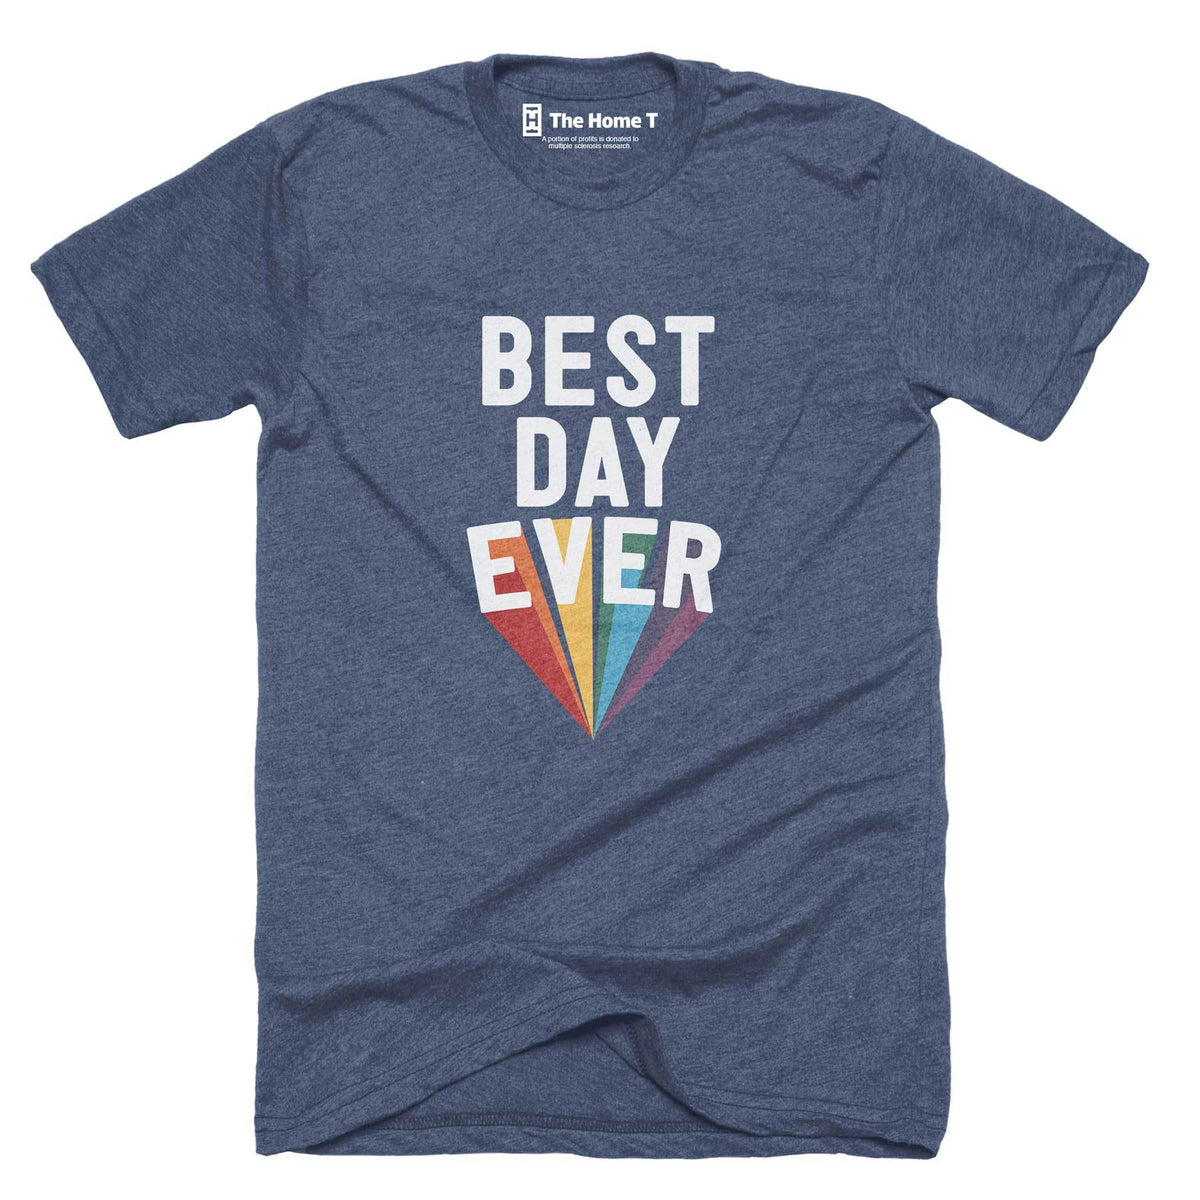 Best Day Ever Crew neck The Home T S Navy